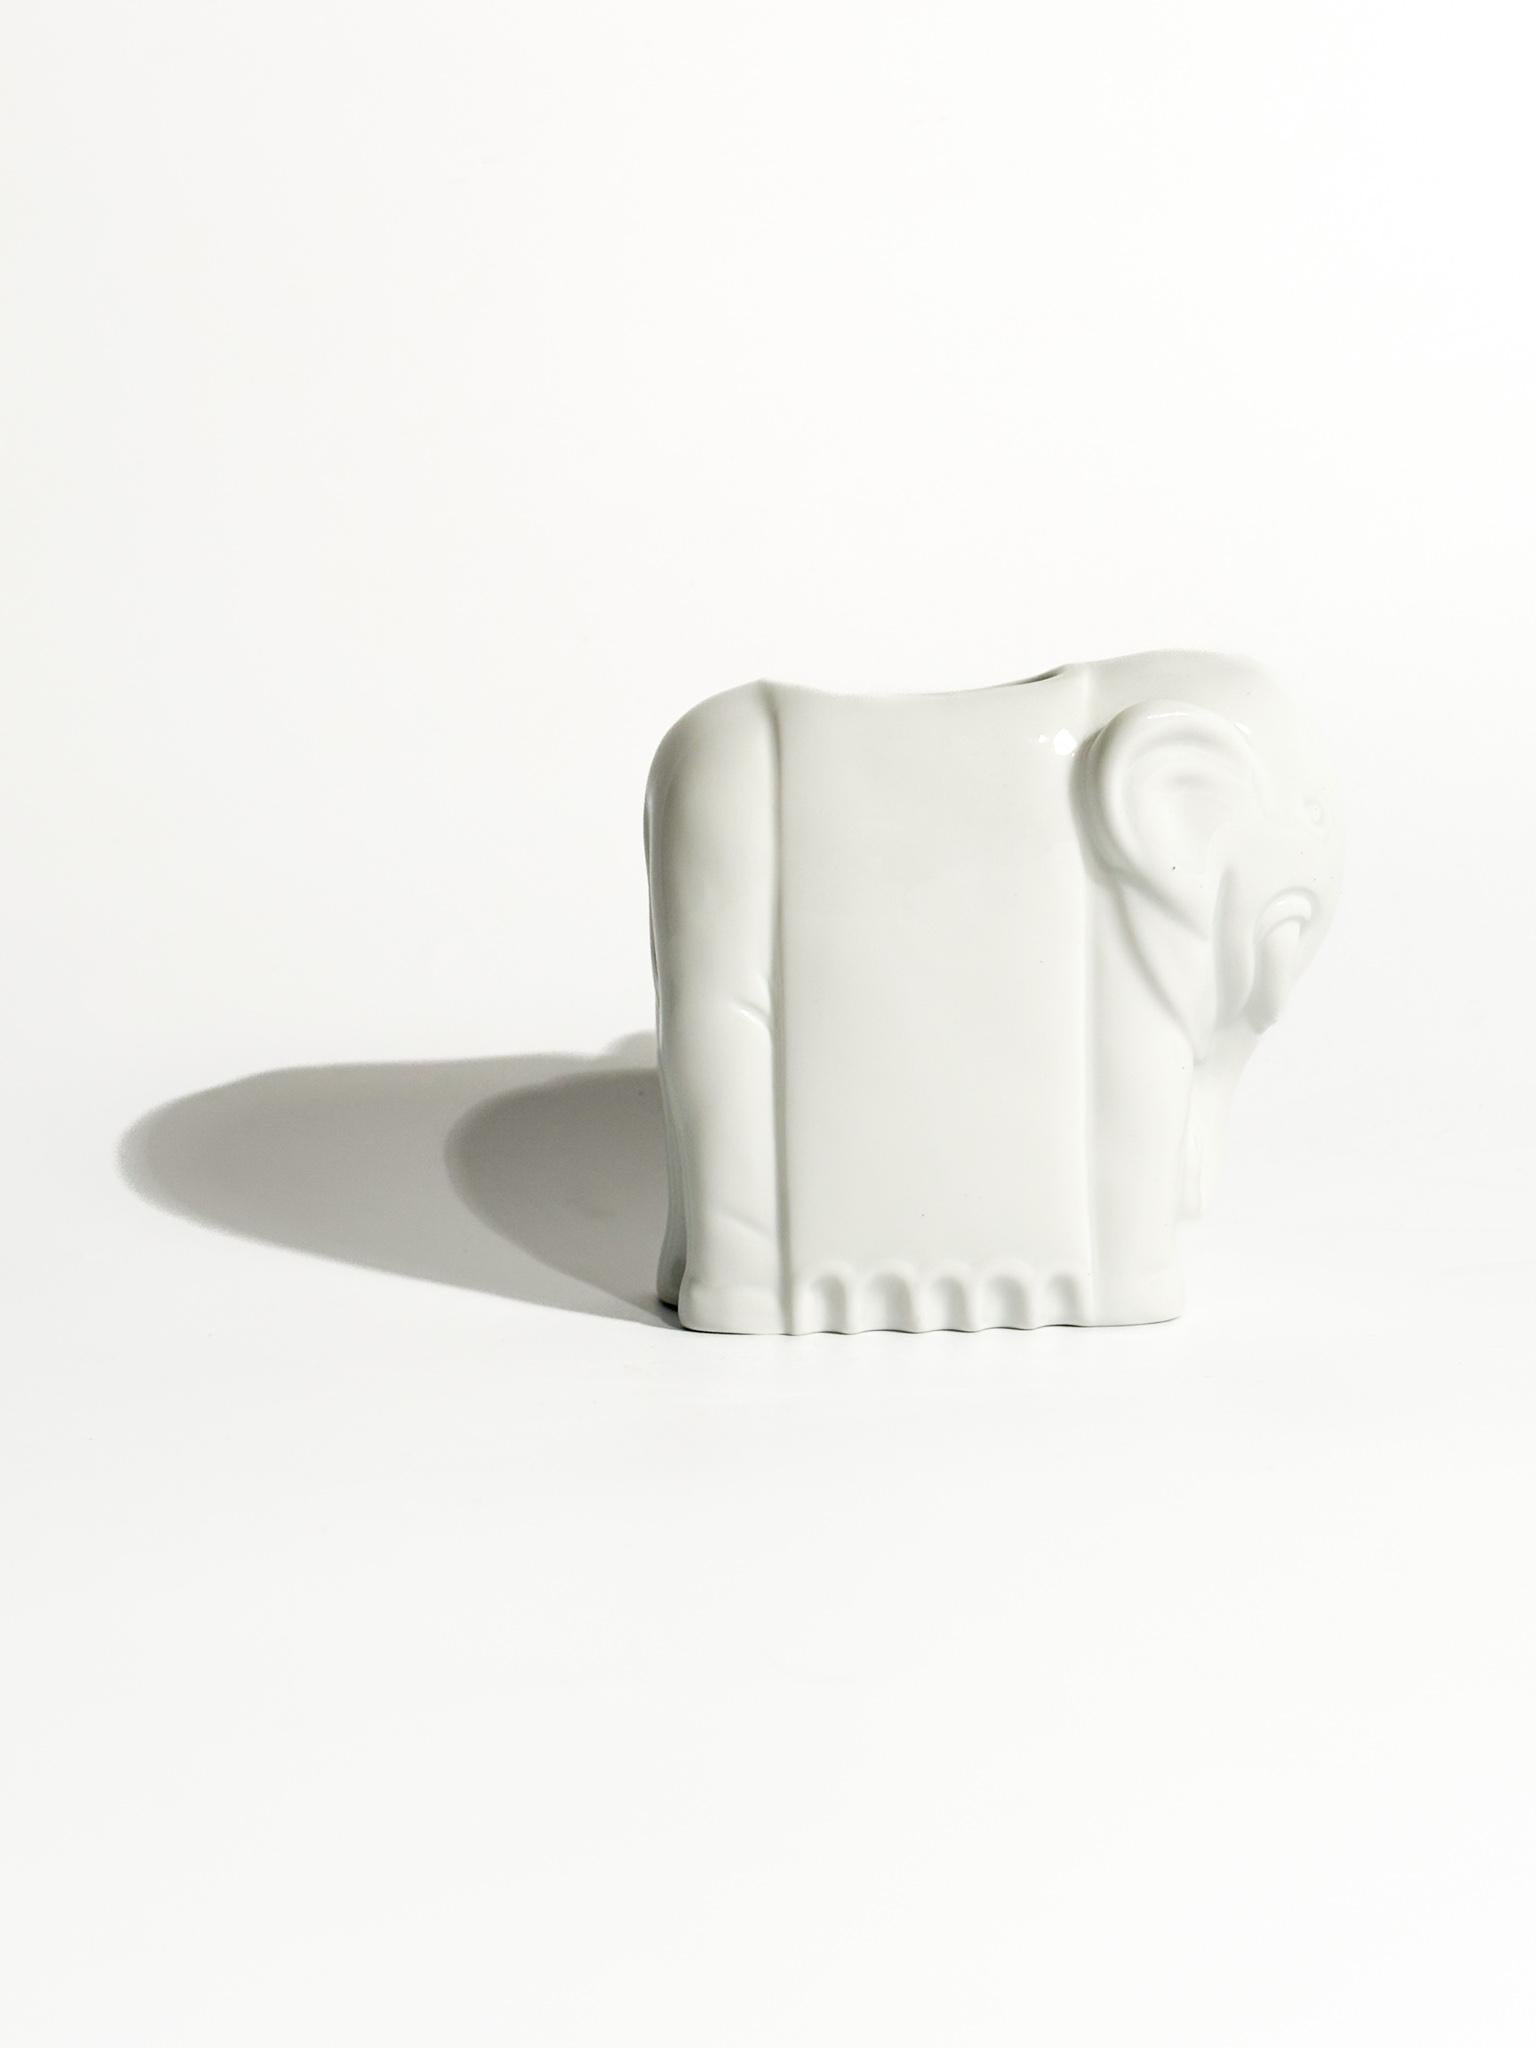 Art Deco White Elephant Vase Re-edition by Gio Ponti for Richard Ginori 1980s For Sale